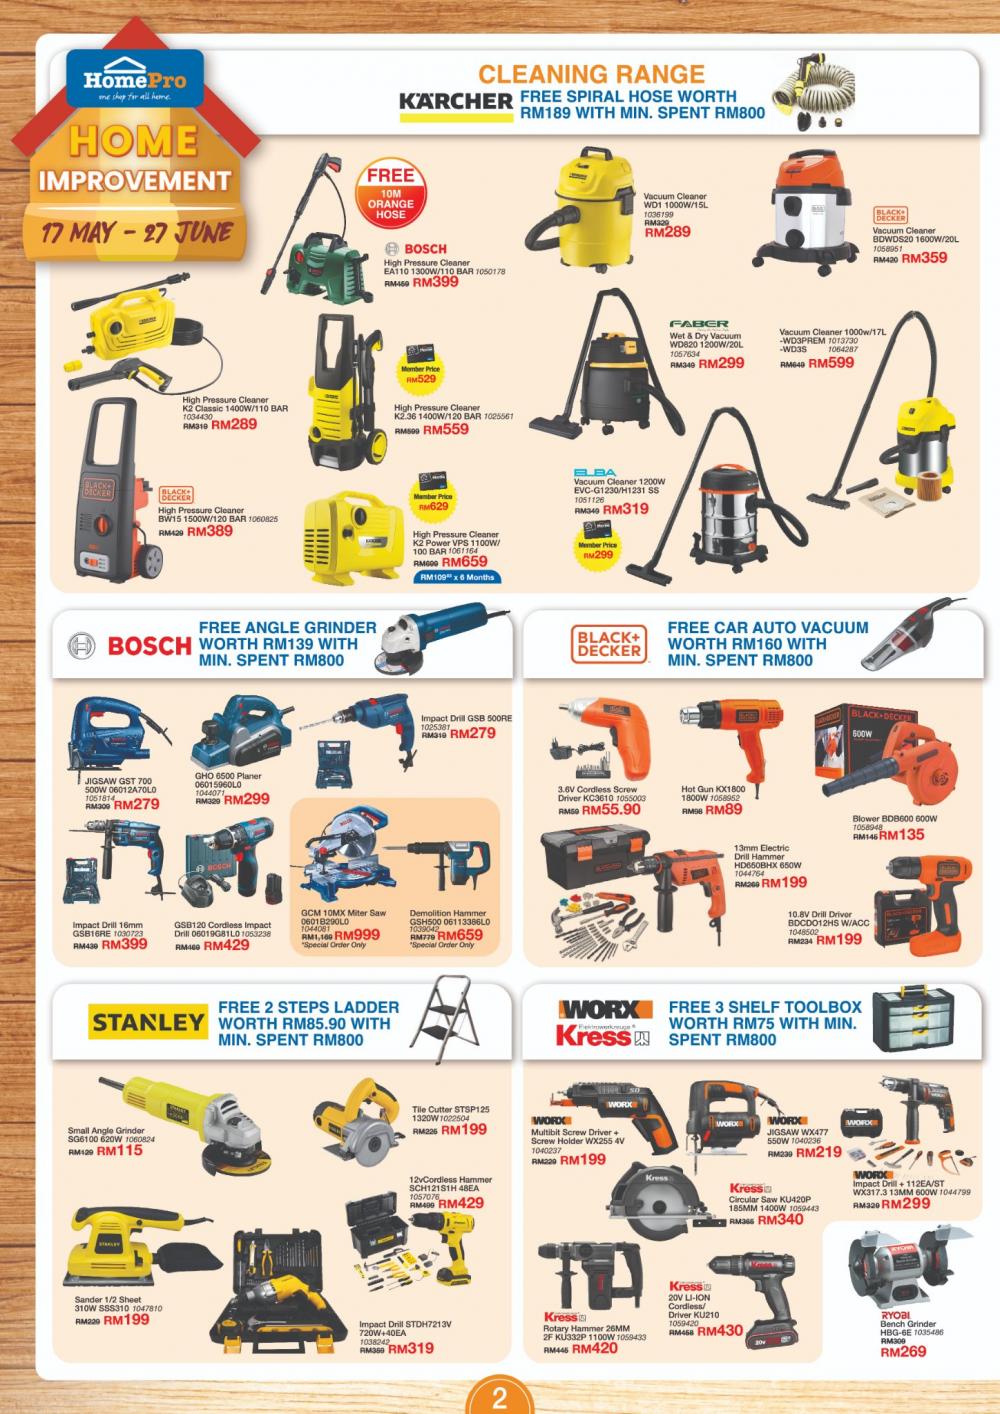 HomePro Home Improvement Promotion Catalogue (17 May 2022 - 27 June 2022)